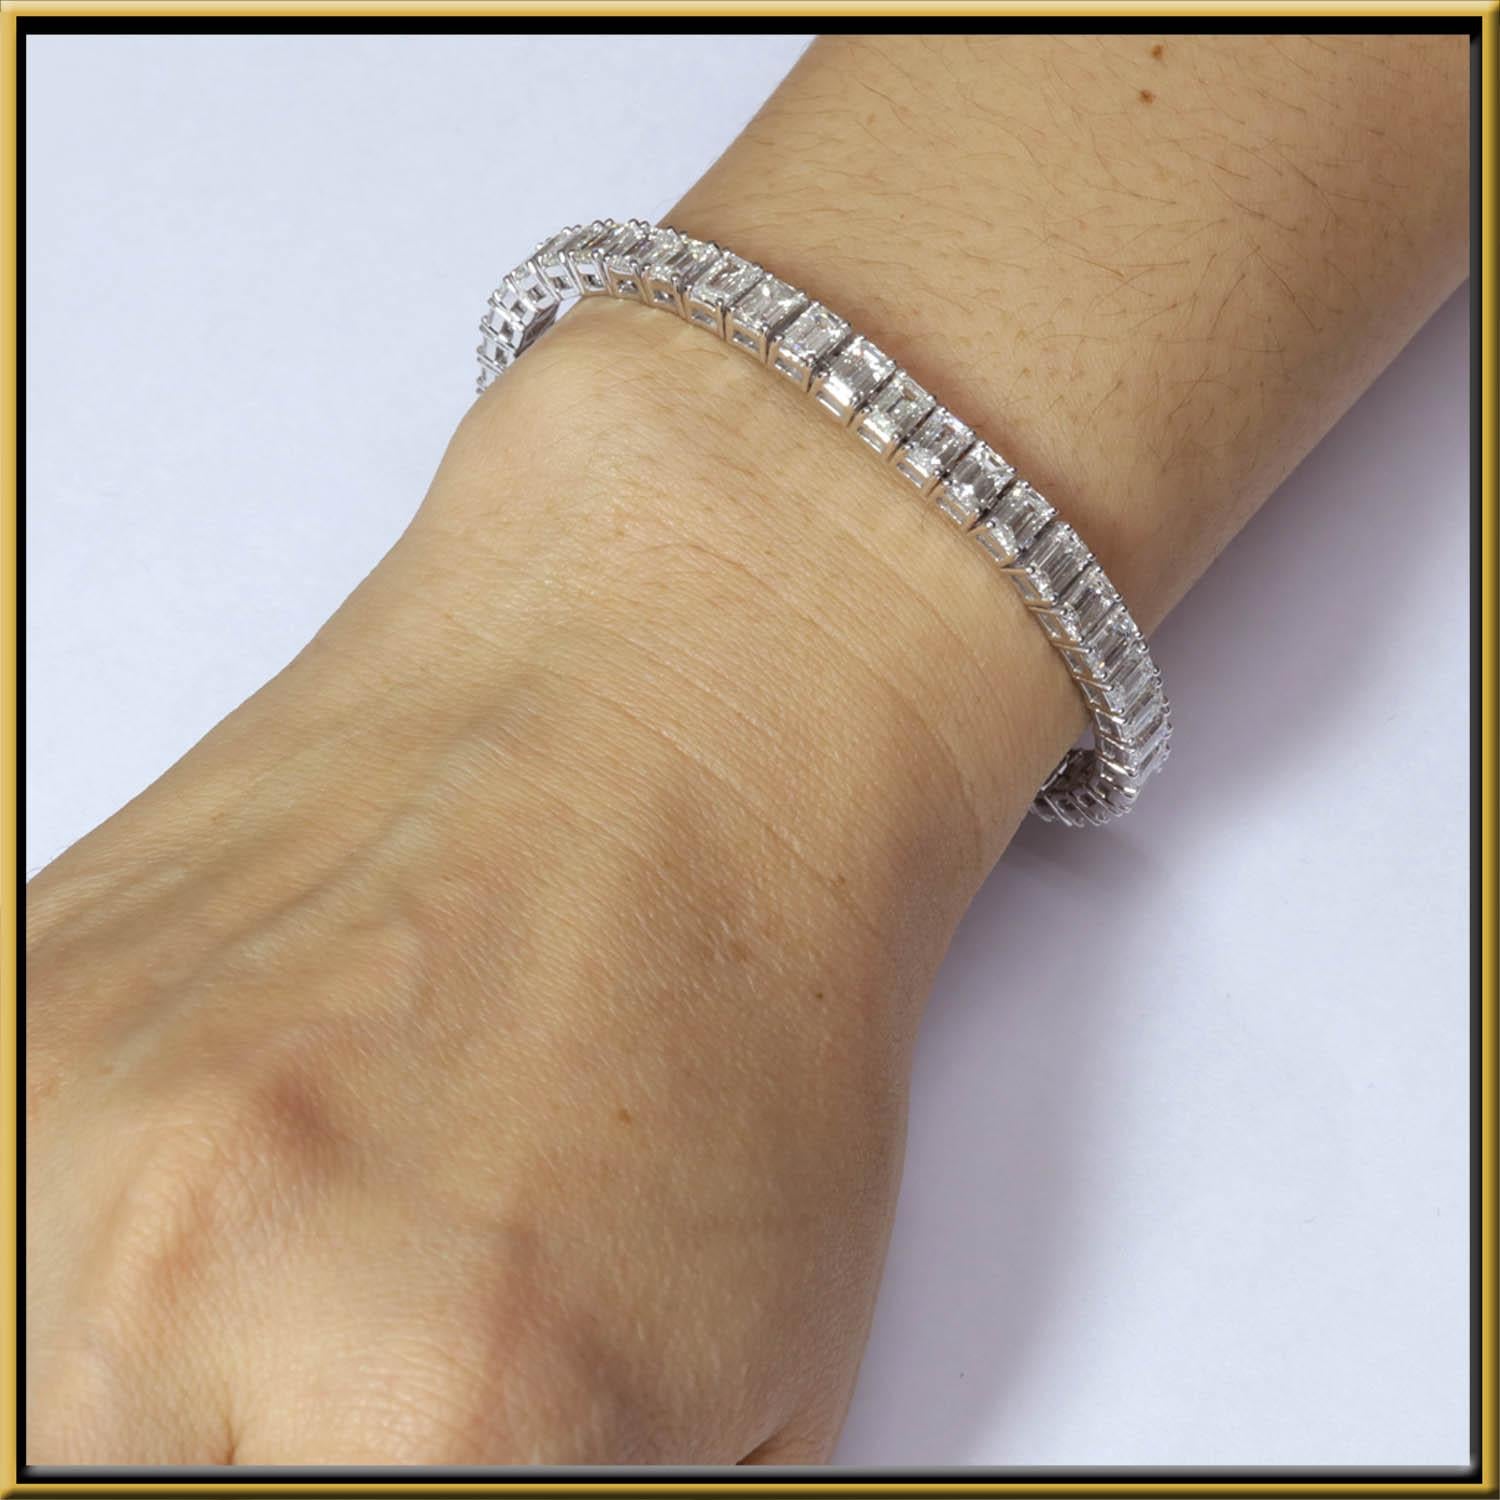 Tennis Bracelet with .30ct Emerald Cut Diamonds set in 18k Gold. Total weight is approximately 14.3ct.
This is a classic statement bracelet that never goes out of style. 
It is lightweight yet durable, making it a perfect daily wear item.
The stone